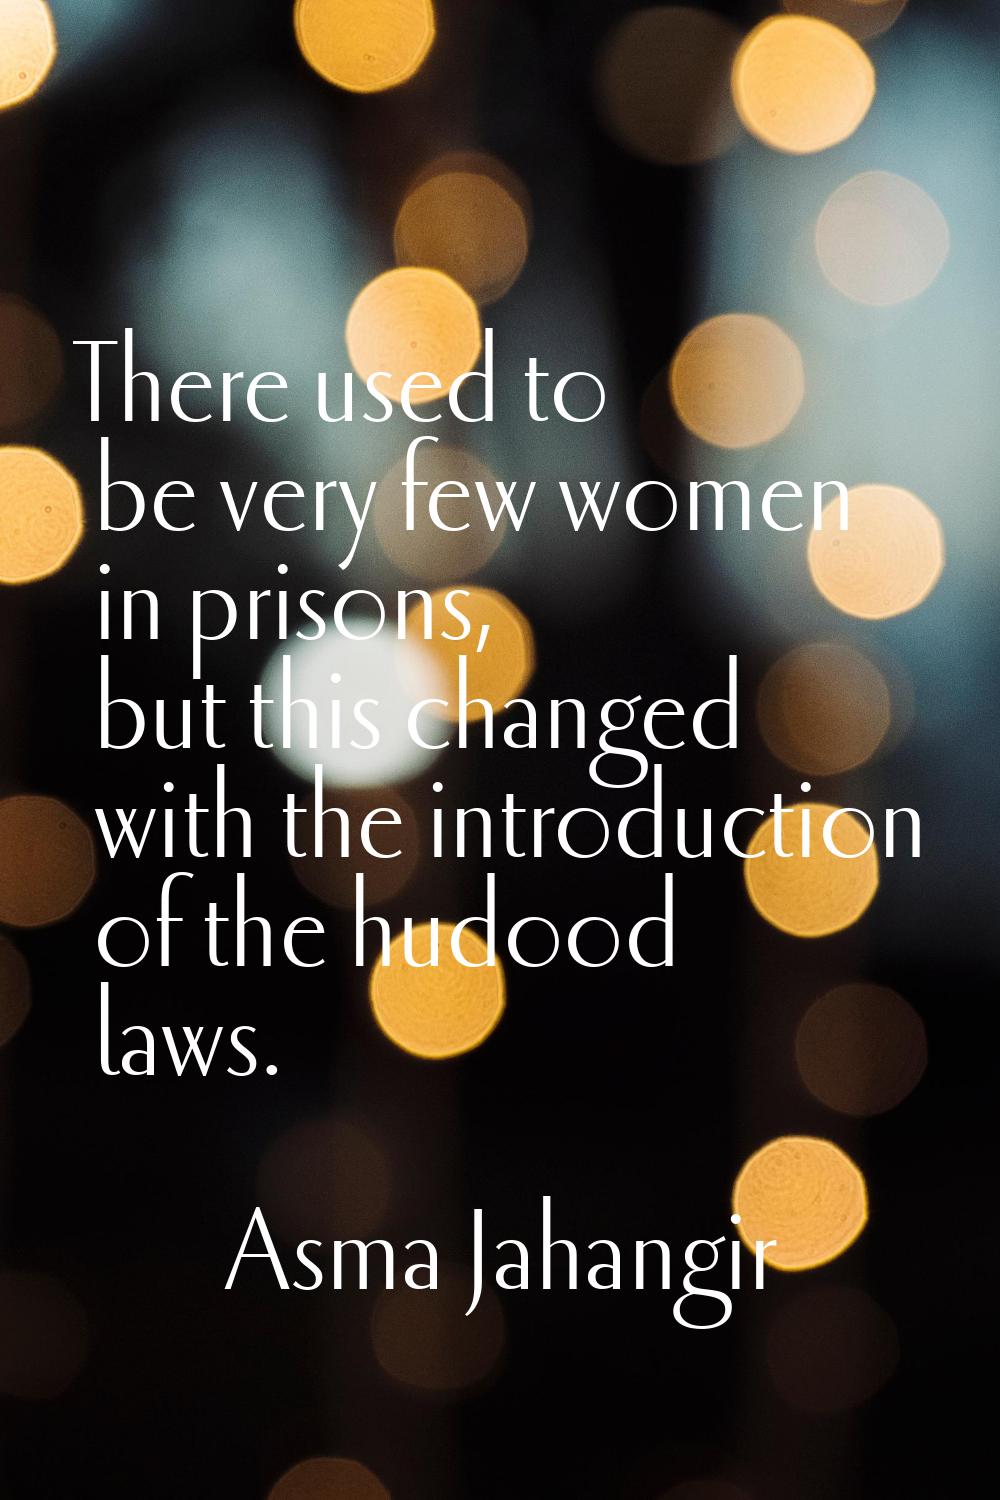 There used to be very few women in prisons, but this changed with the introduction of the hudood la